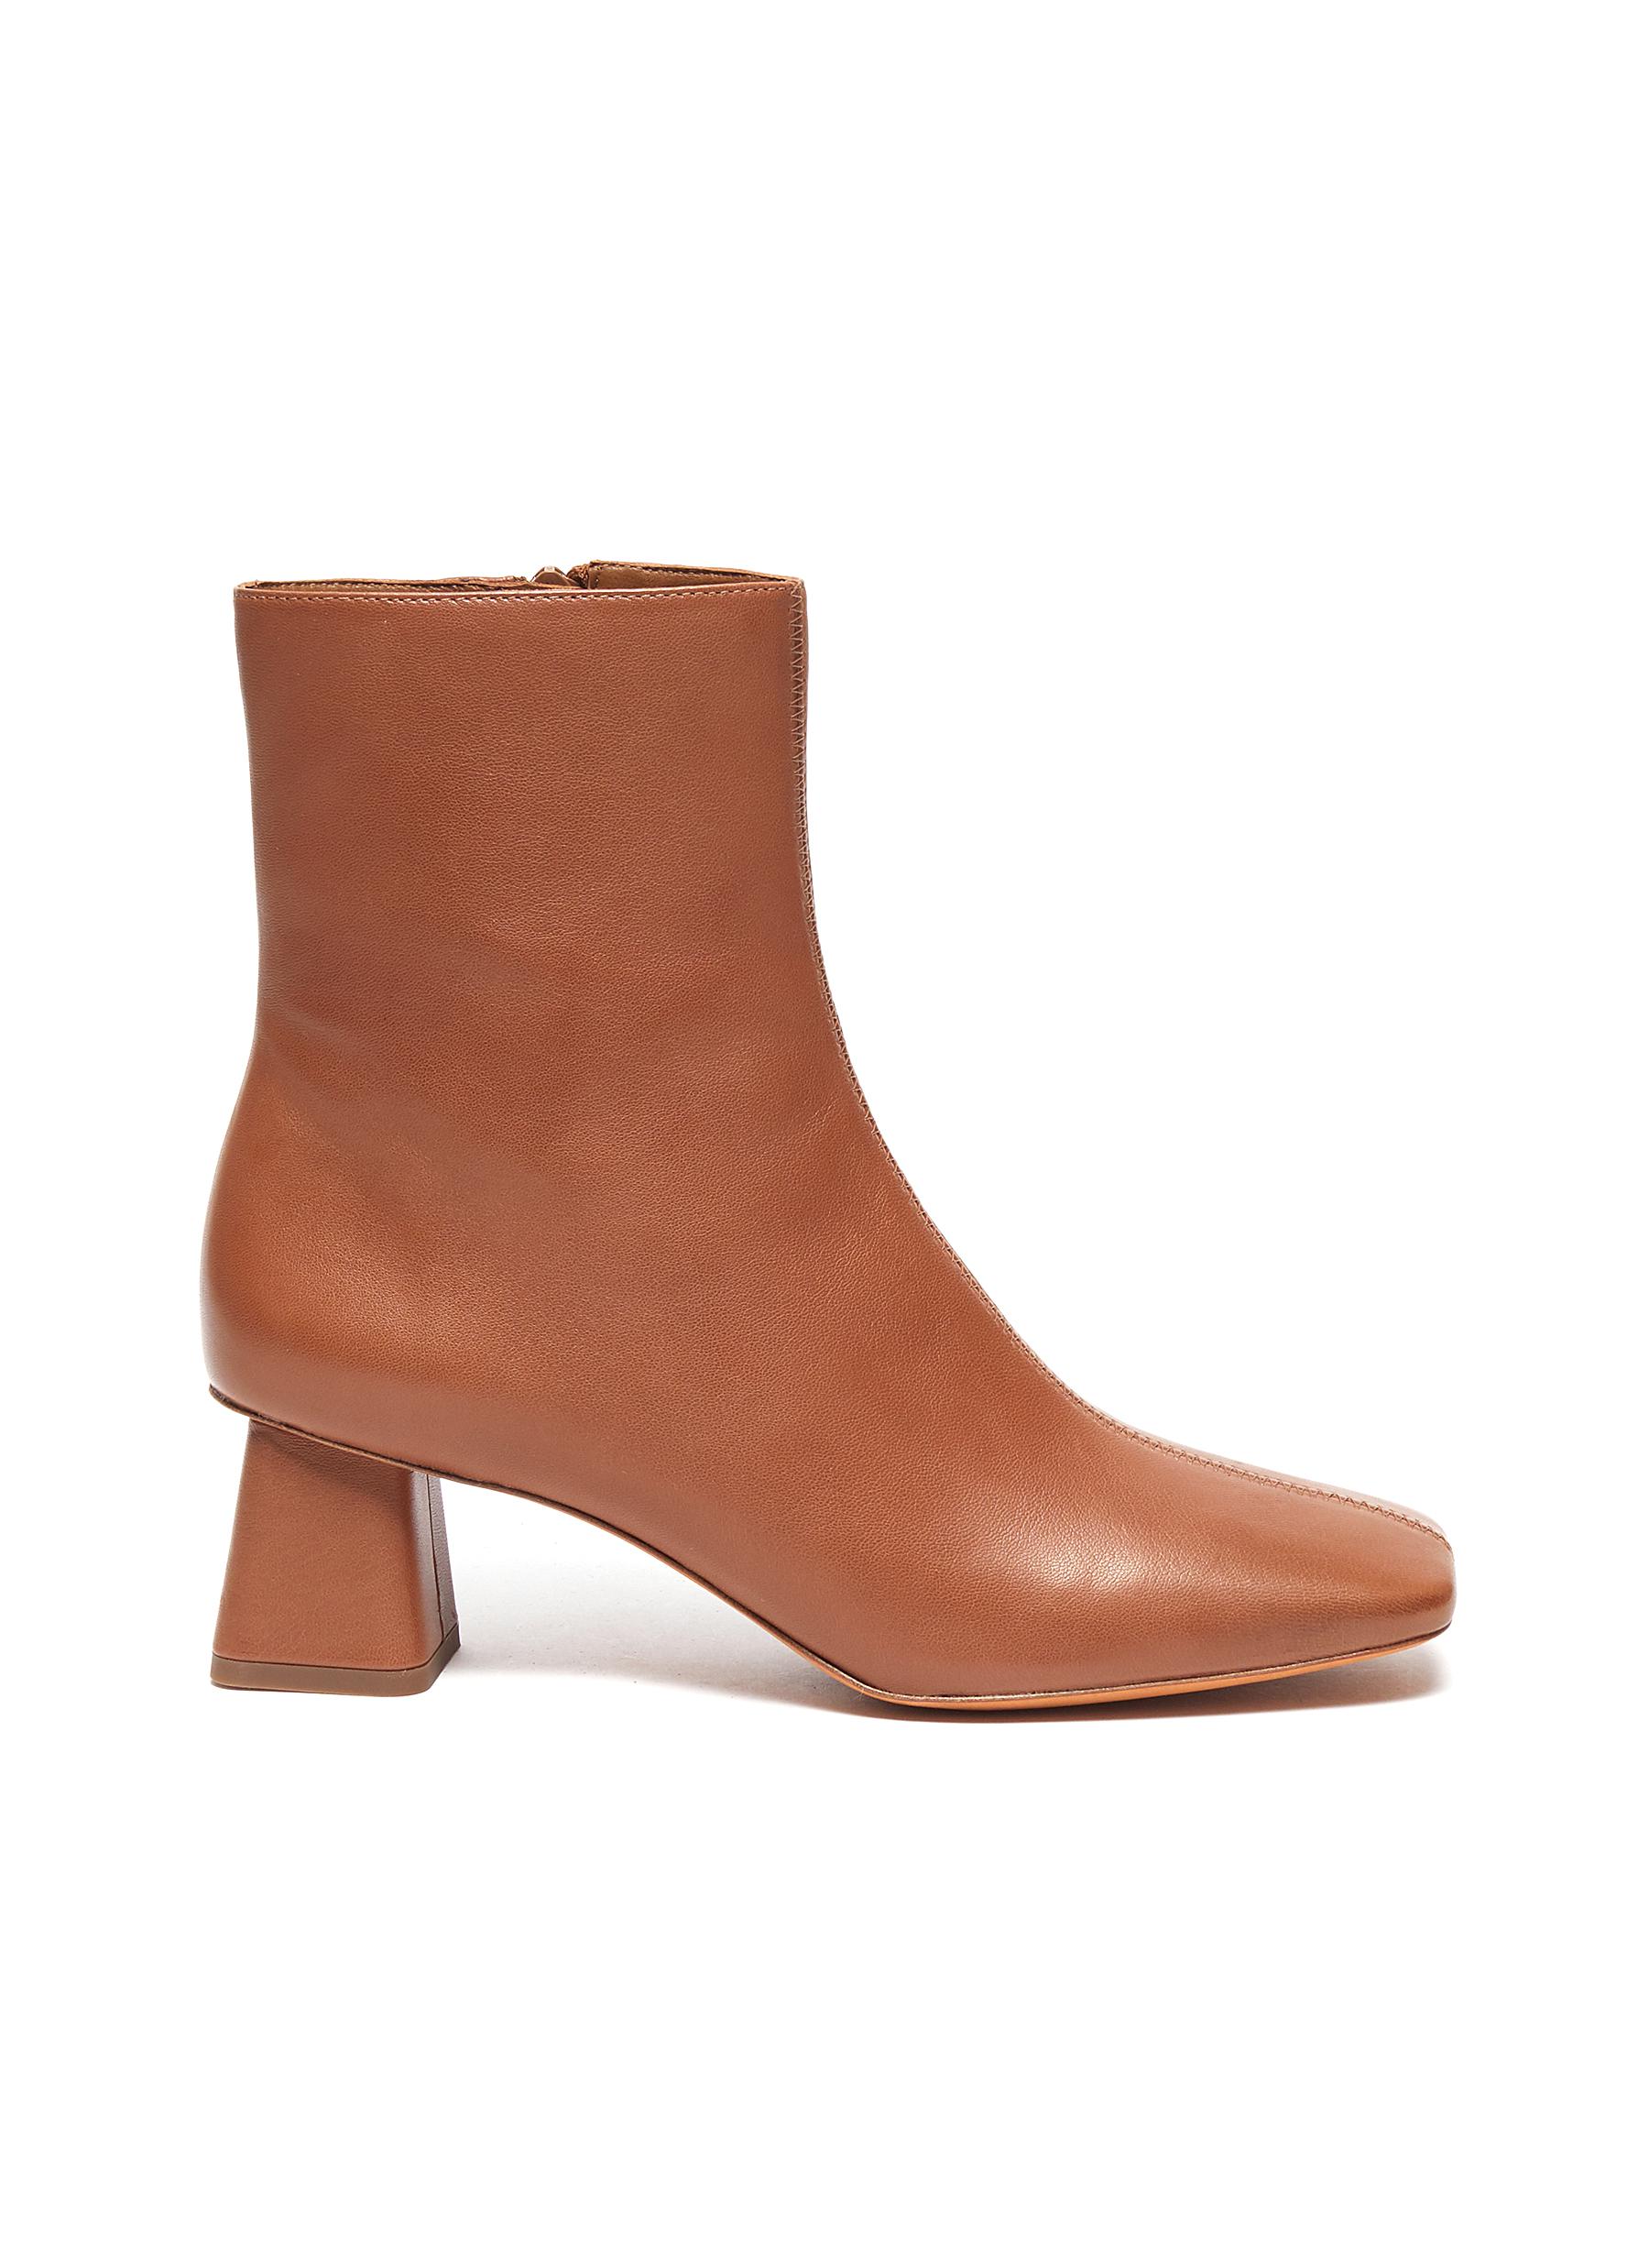 vince leather booties